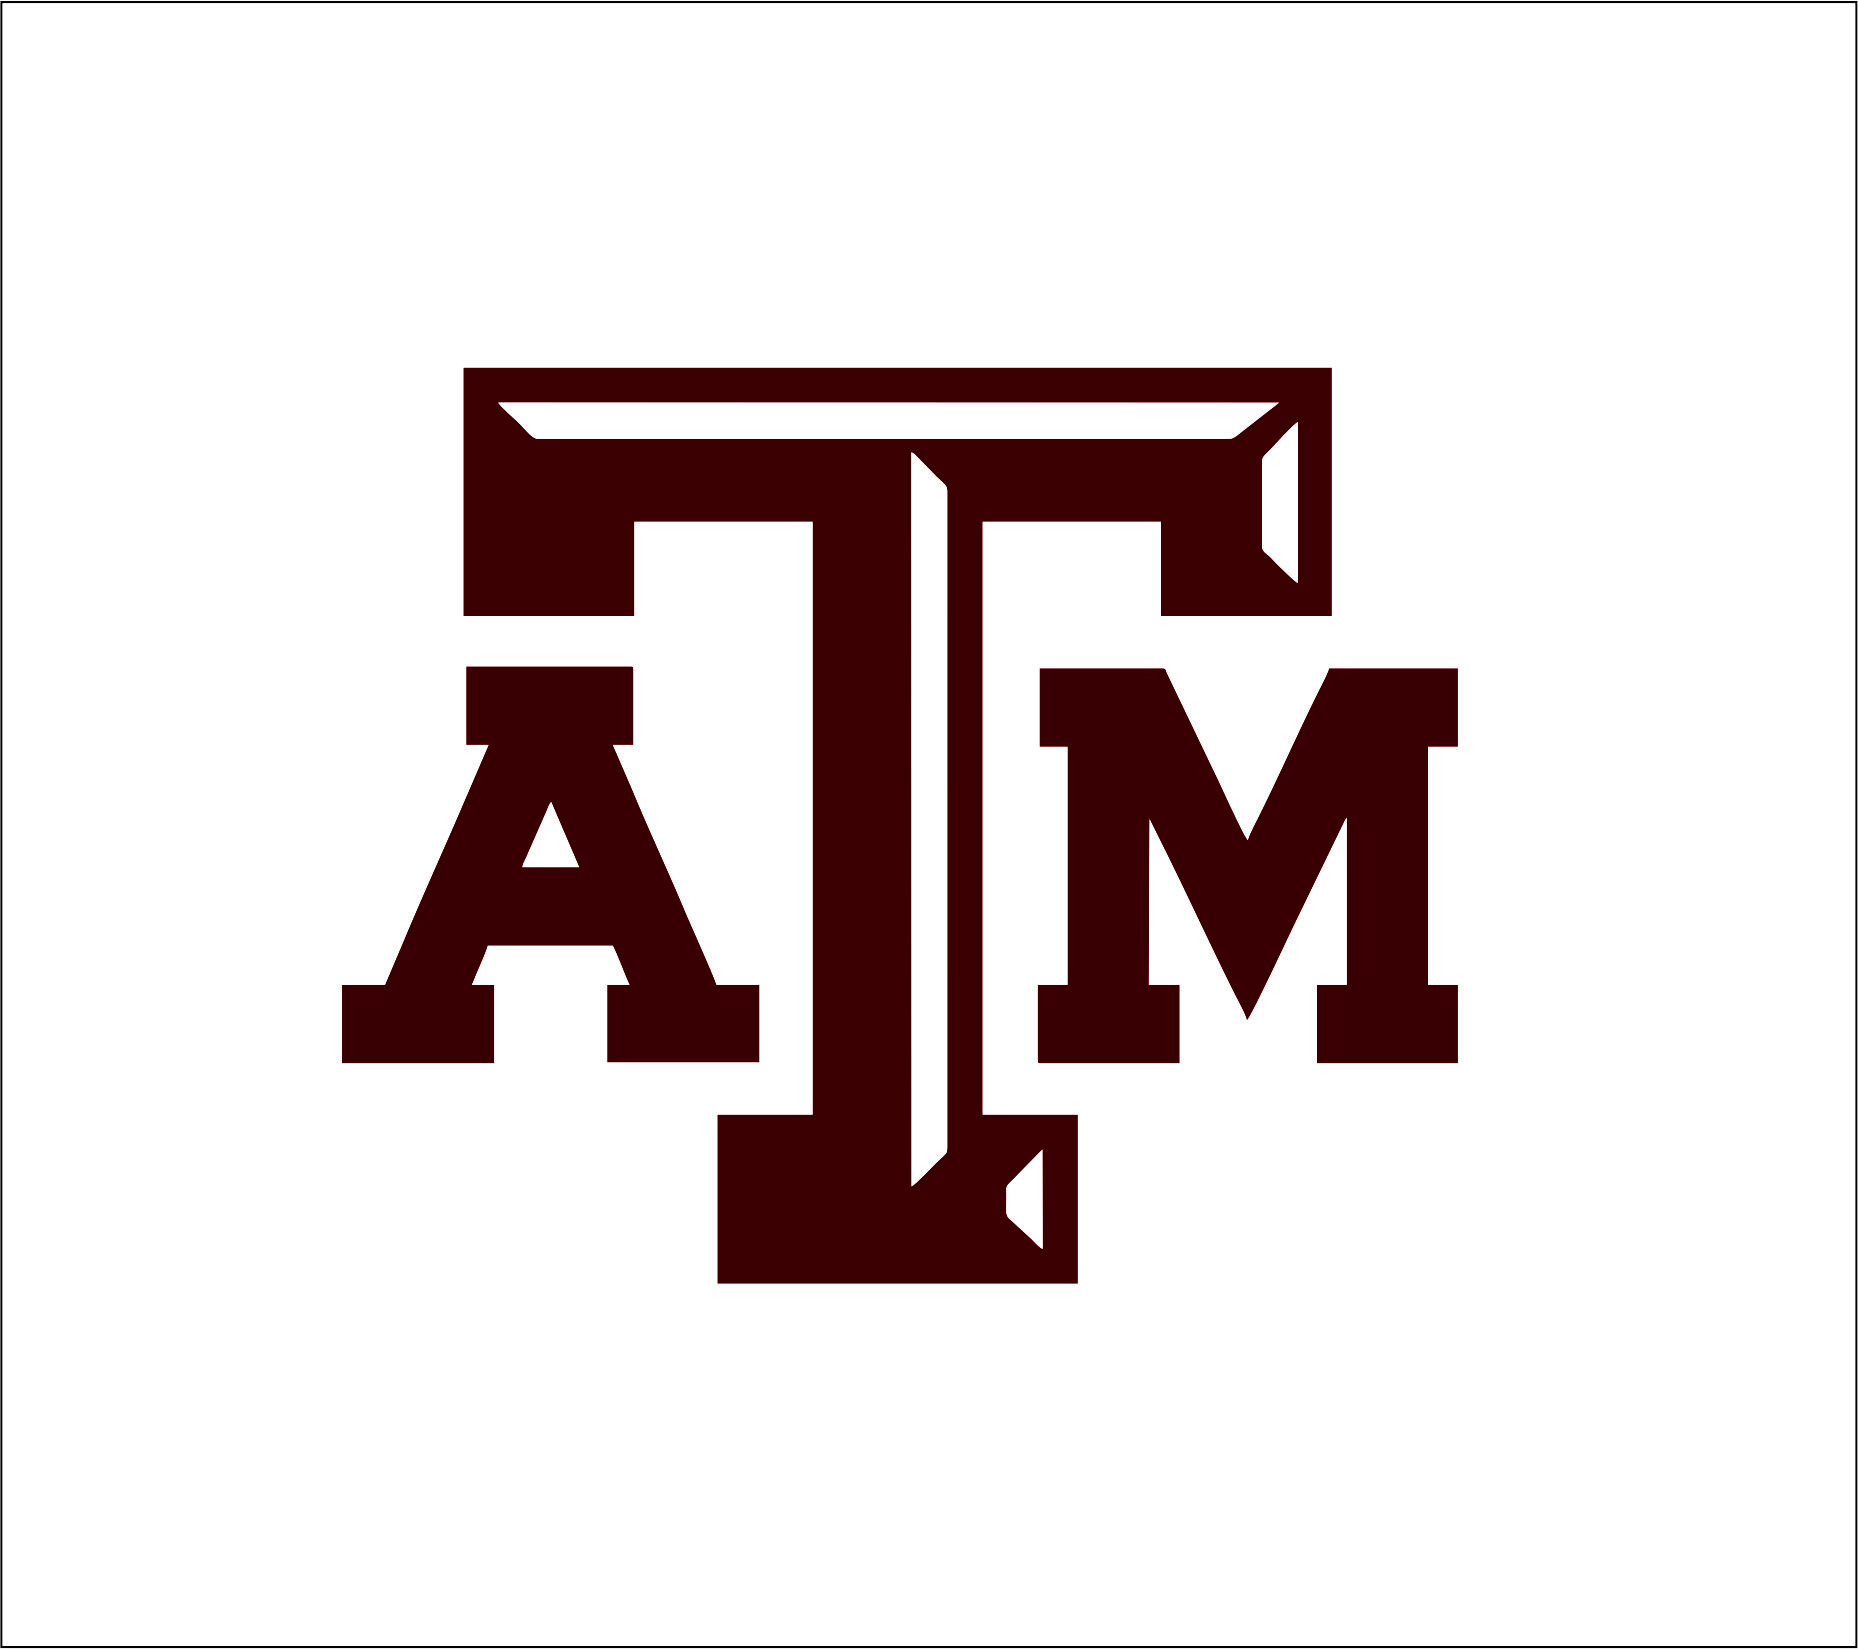 13 Files Texas AM Aggies, Texas AM Aggies svg, Texas Am Aggies clipart,  Texas A&M Aggies cricut,football svg, NCAA Sports svg, png dxf eps, - Pe  Dear in 2023